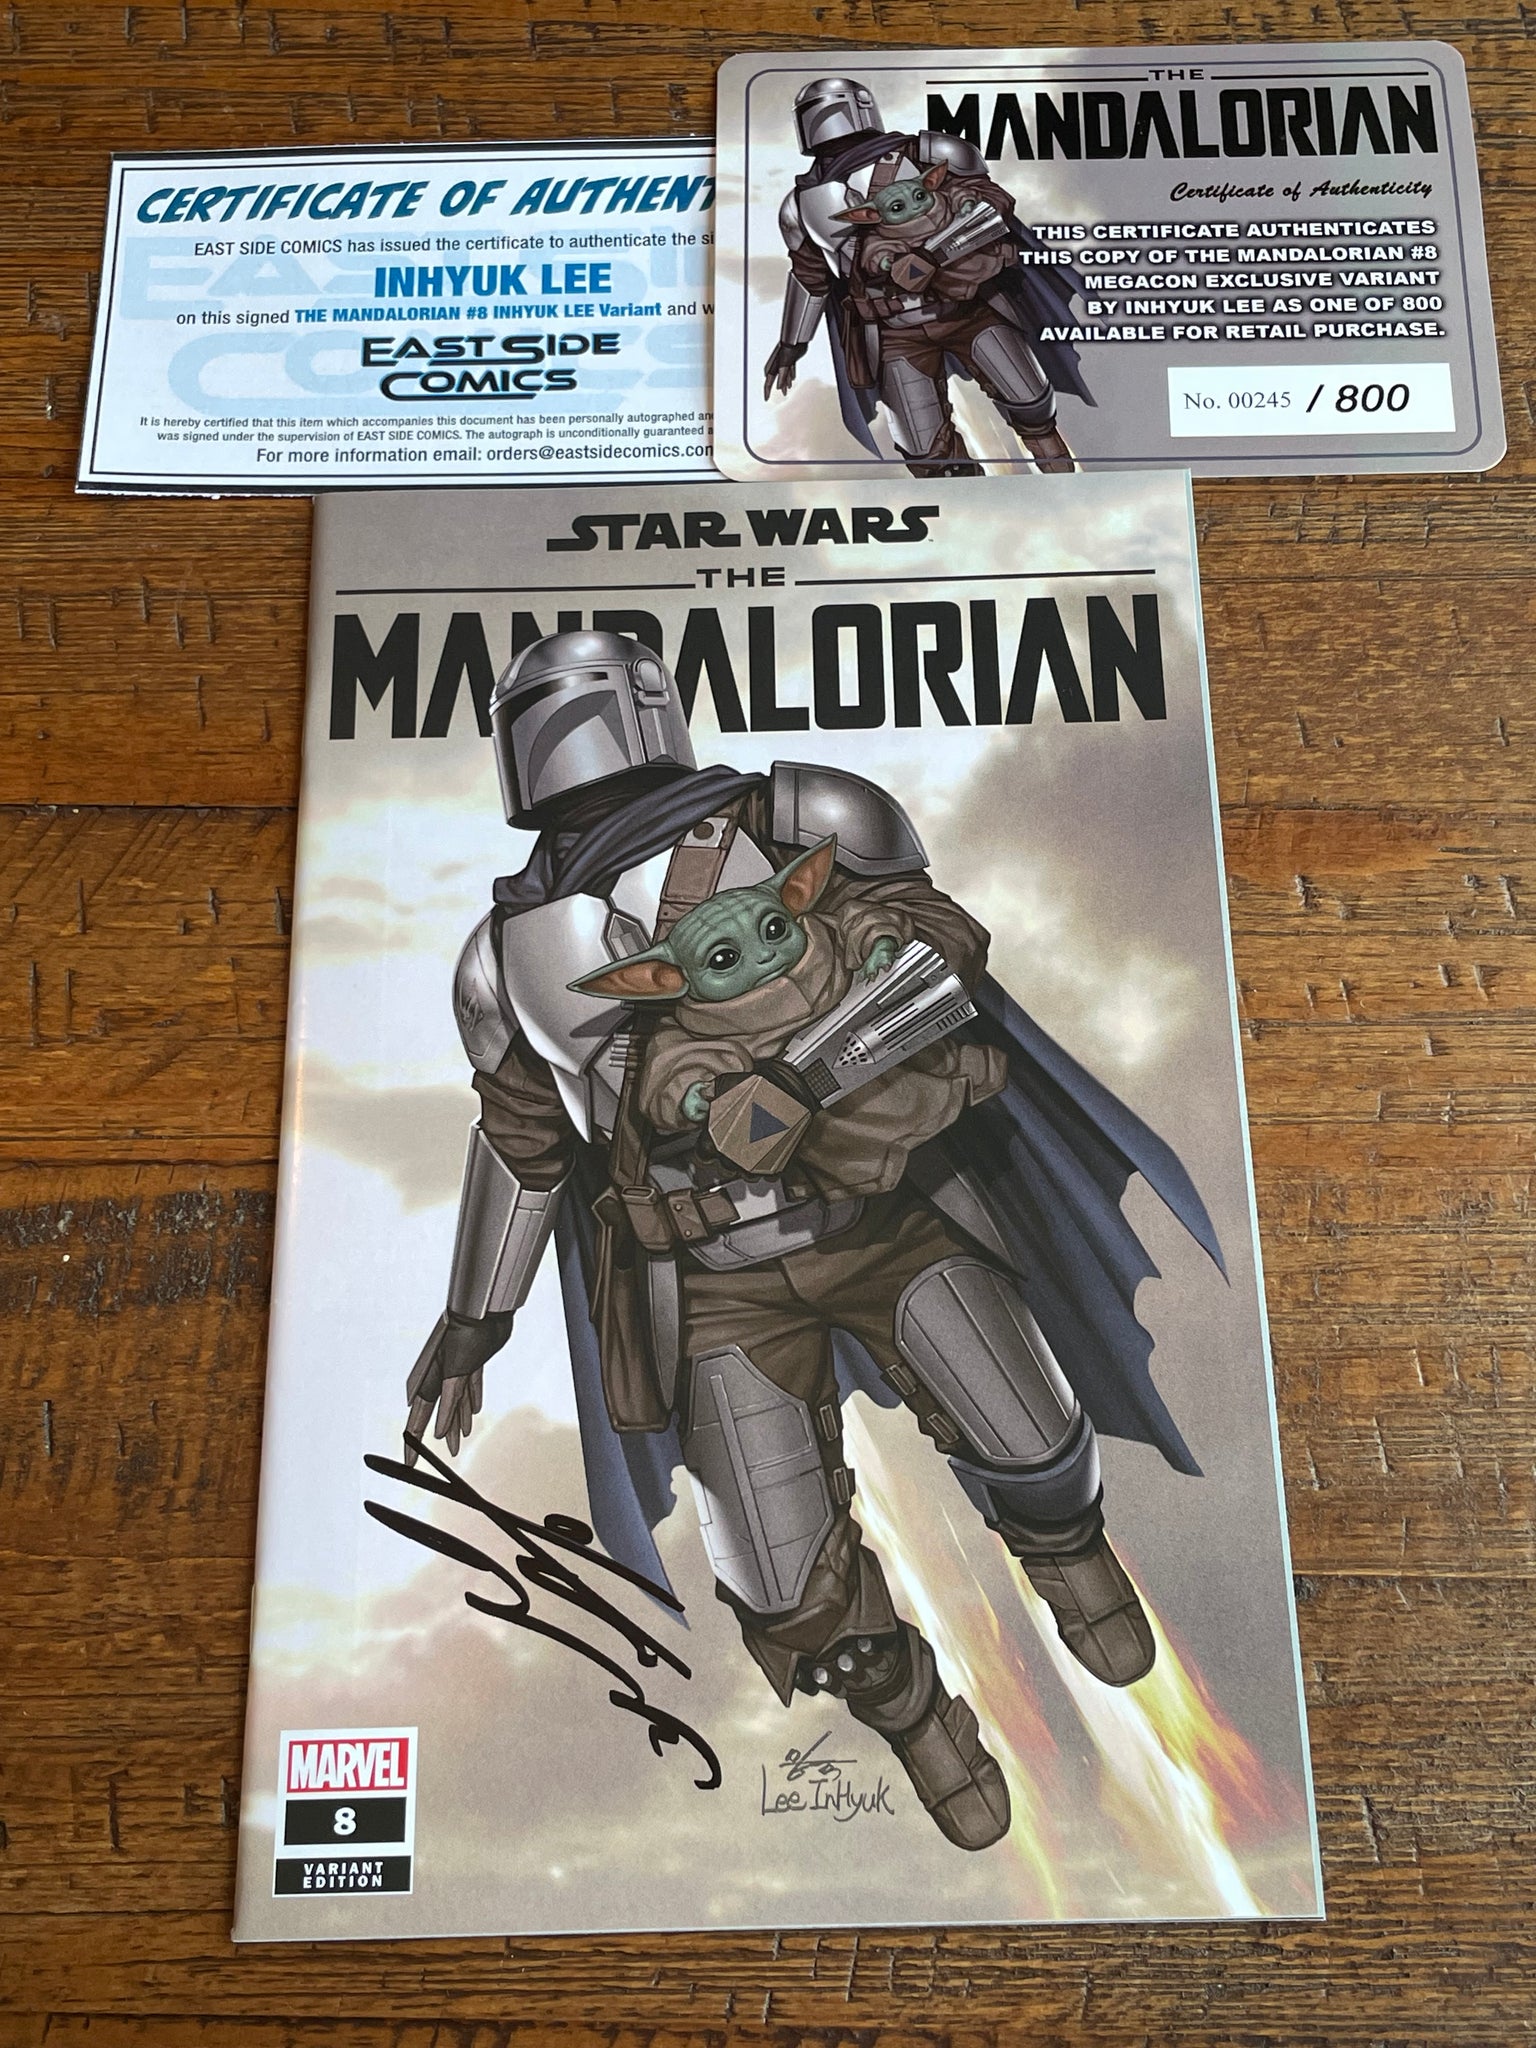 THE MANDALORIAN #8 INHYUK LEE SIGNED MEGACON EXCL VARIANT LE to 800 W/ COA